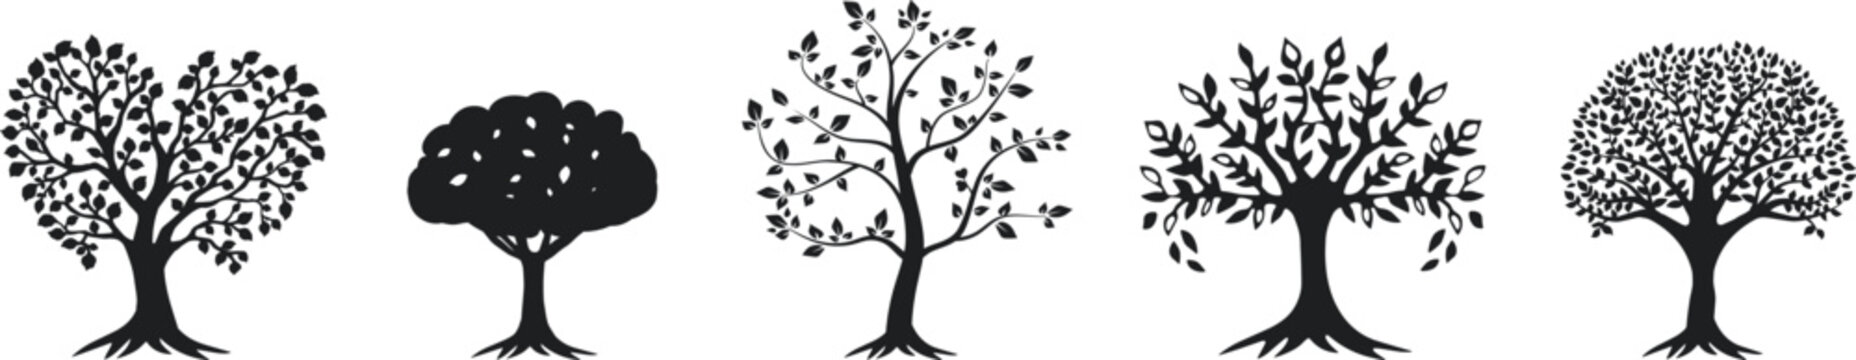 tree silhouette with leaves and root vector. heart tree, circle tree vector